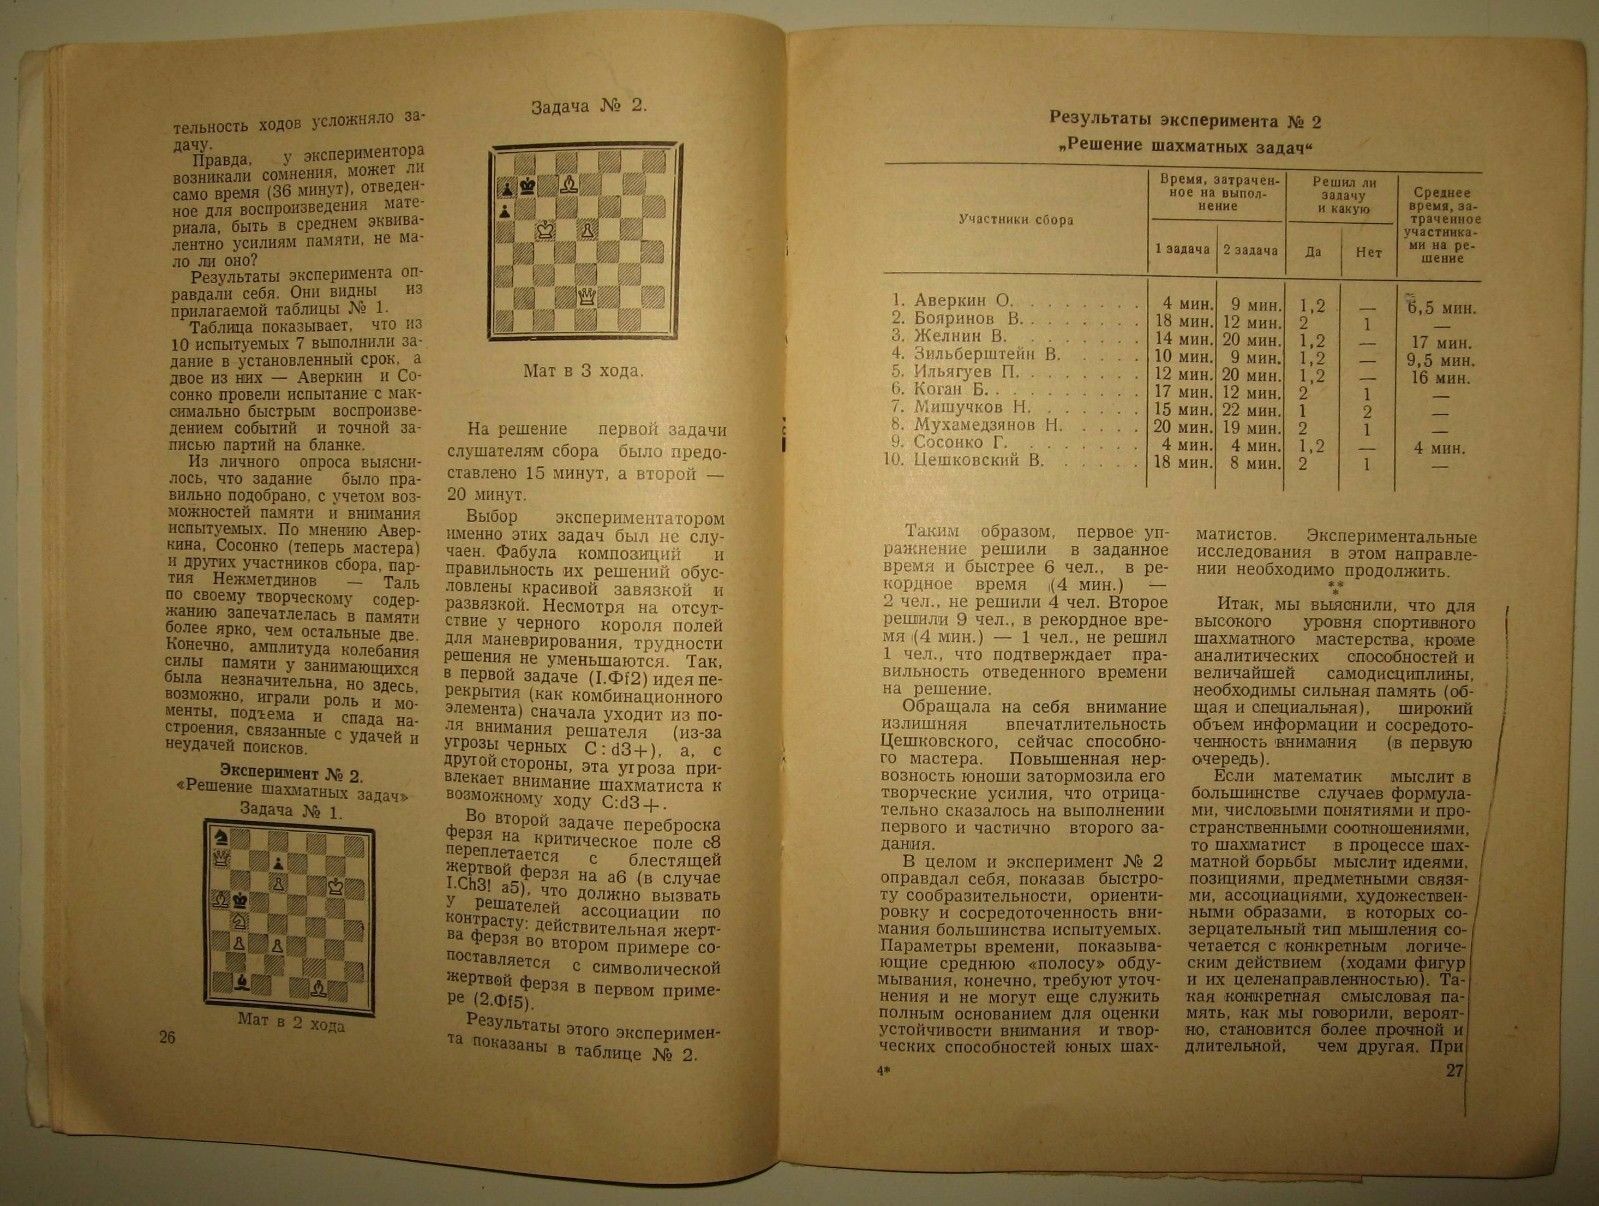 10960.Book signed by author: Rokhlin, Krogius. Memory and attention of chess player